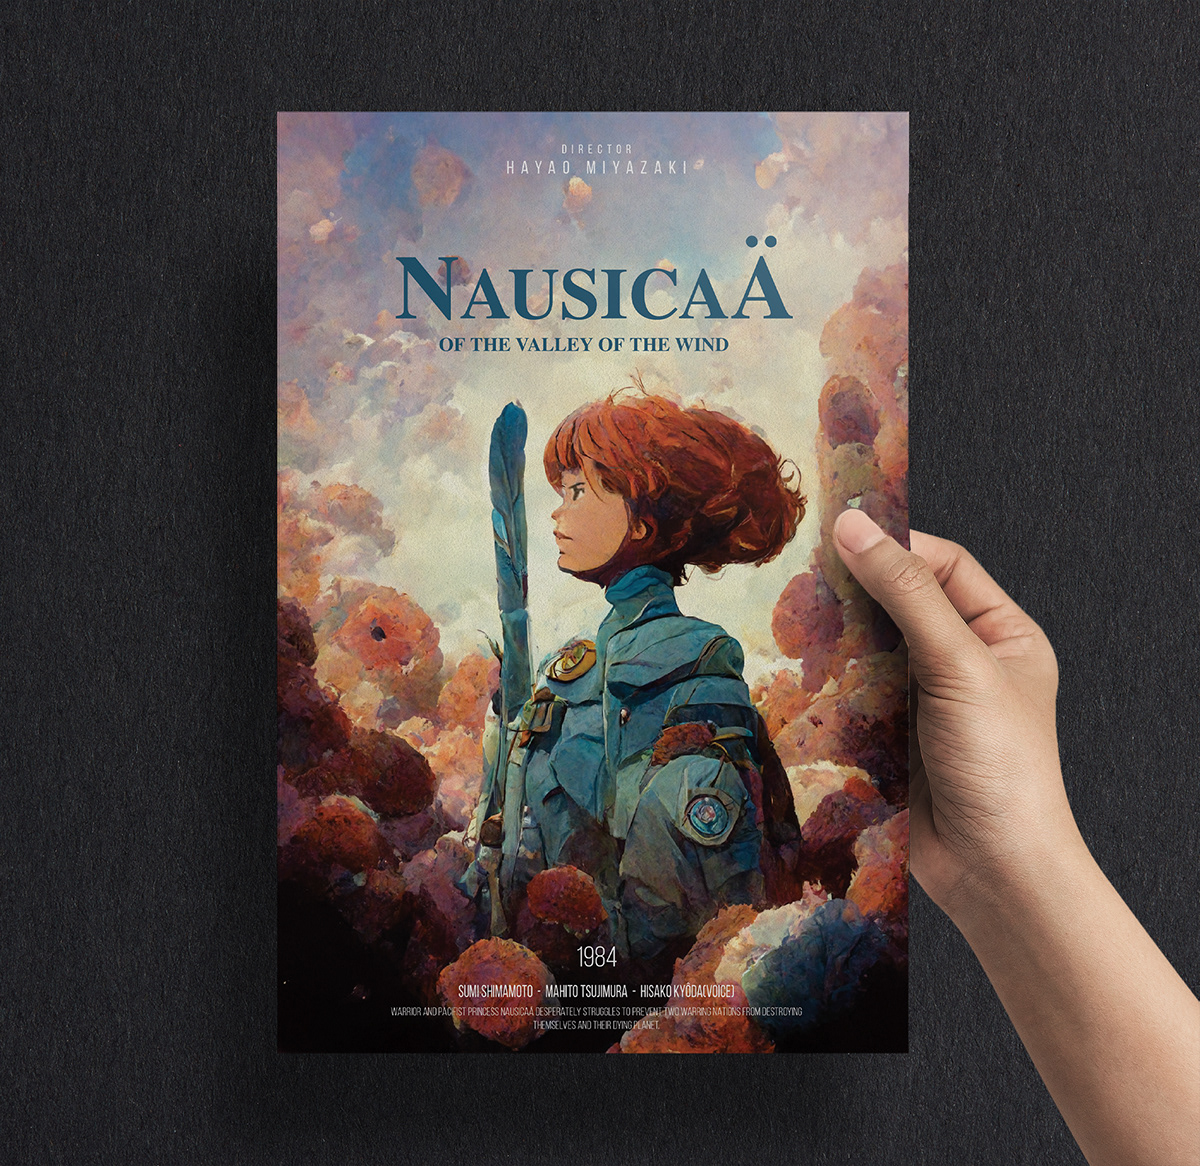 NAUSICAA of the valley of the wind

